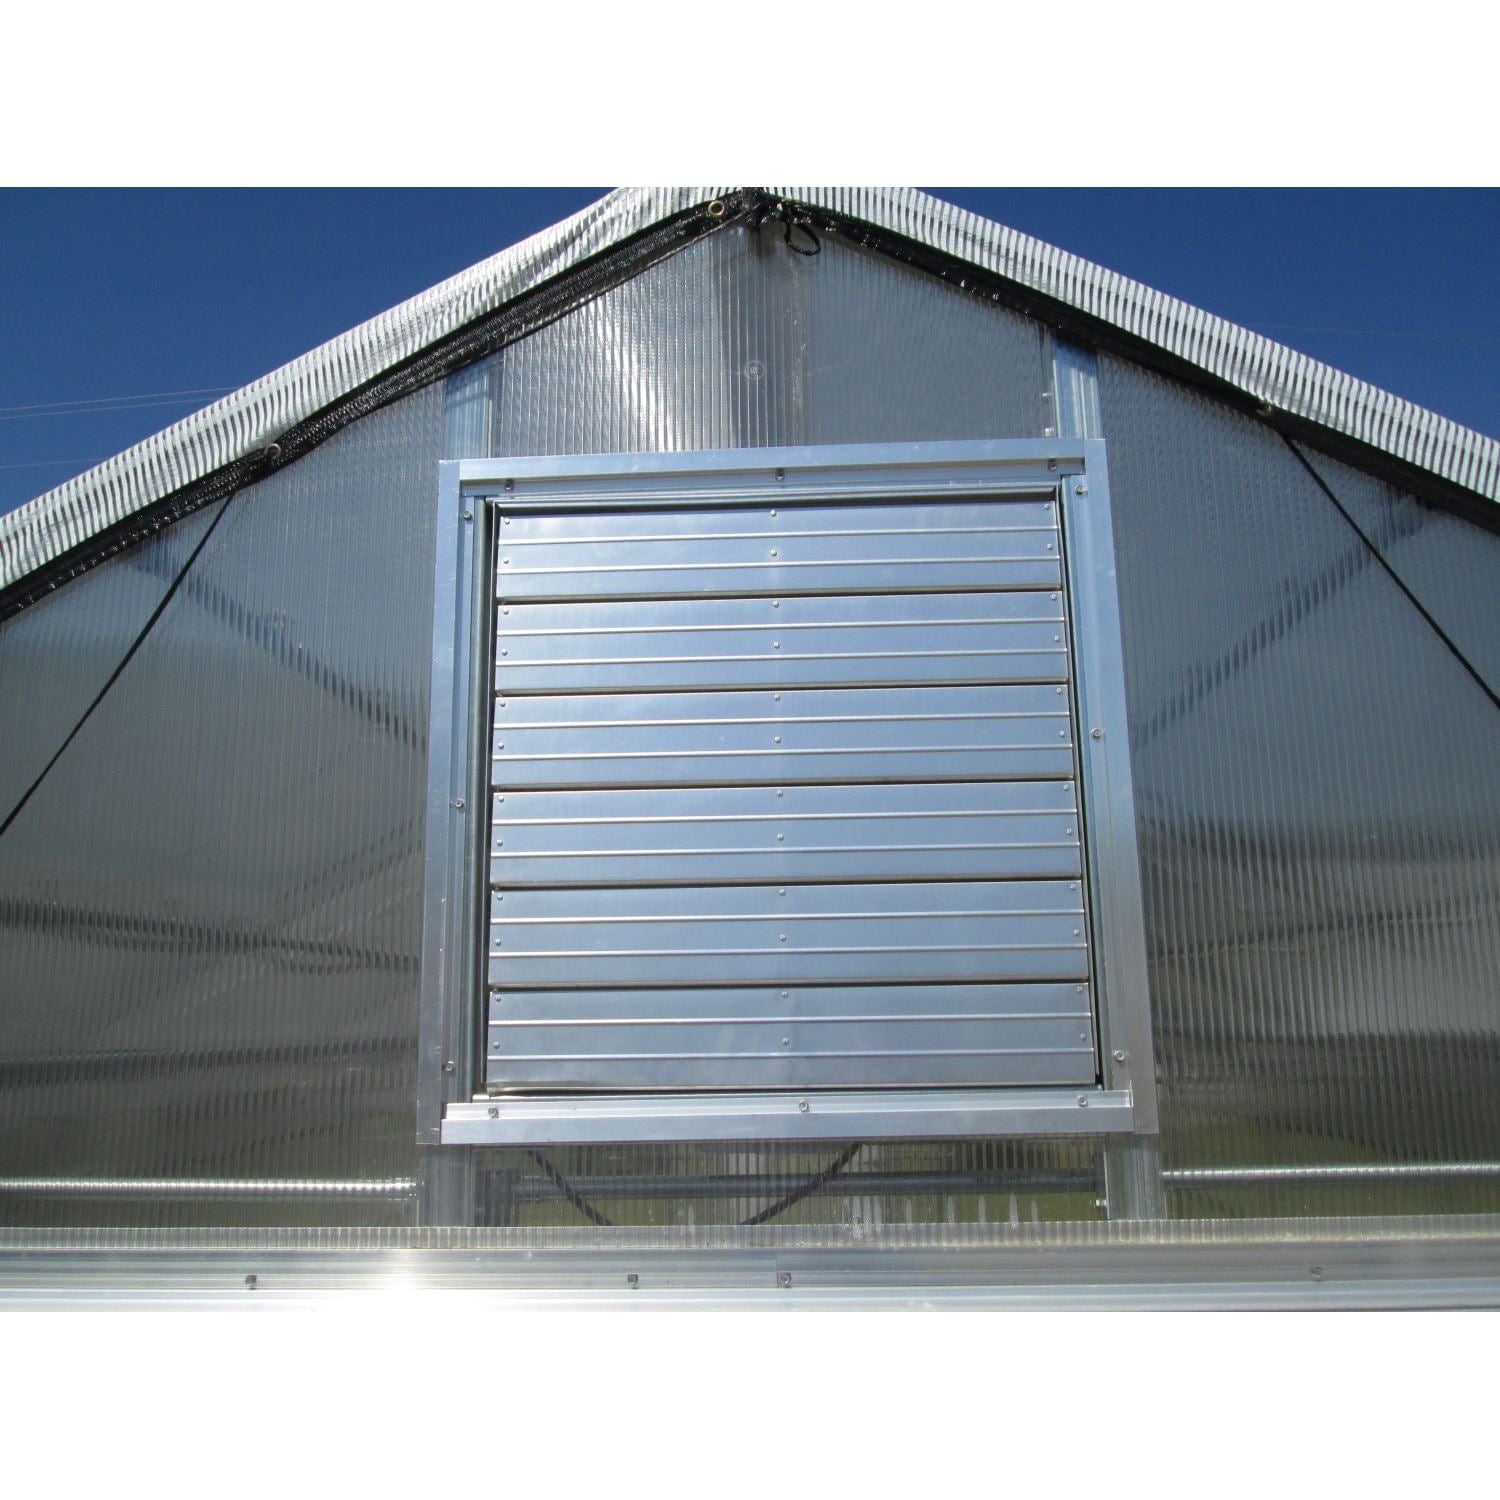 Riverstone Industries Deluxe Greenhouse Kit Riverstone | Wallace - Premium Grower's Edition - 16FT x 30FT Educational Greenhouse Kit With 8FT High Walls R16308-PG